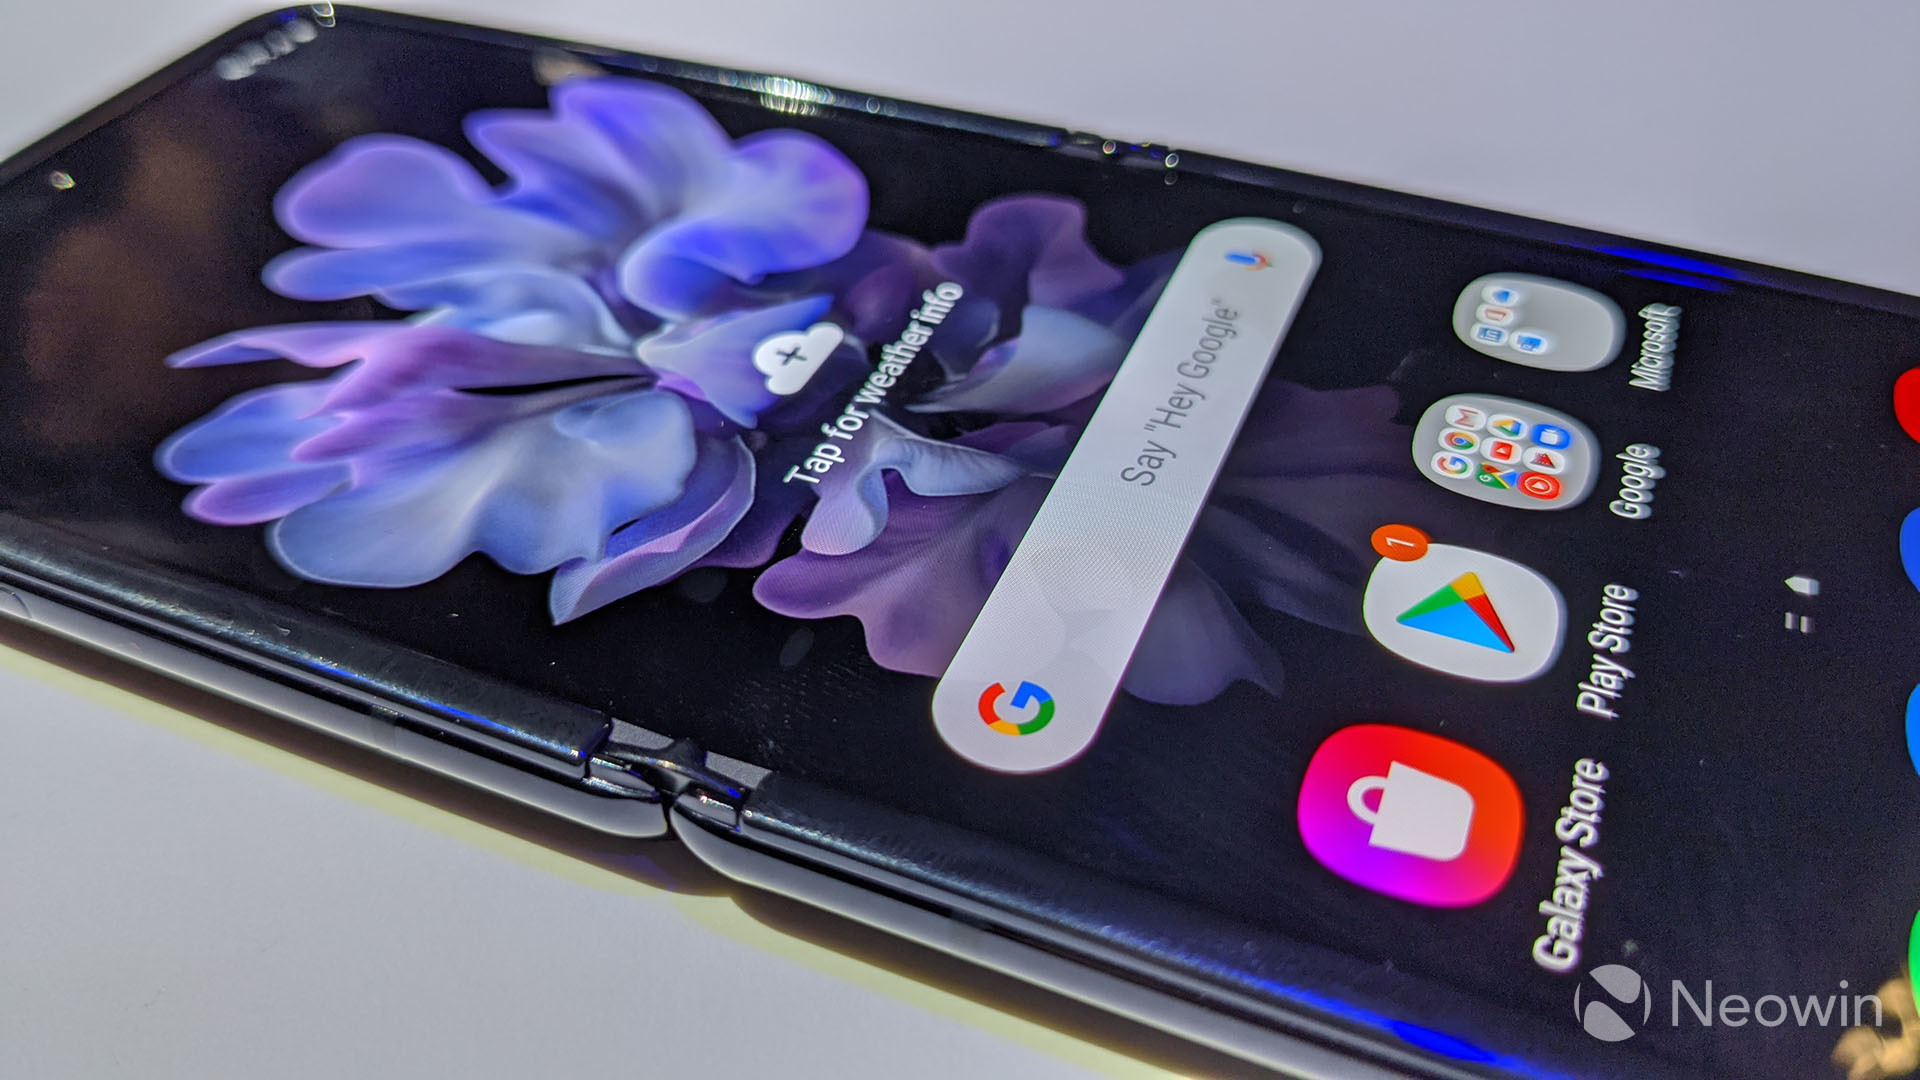 Hands on with Samsung's new foldable smartphone, the Galaxy Z Flip - Neowin